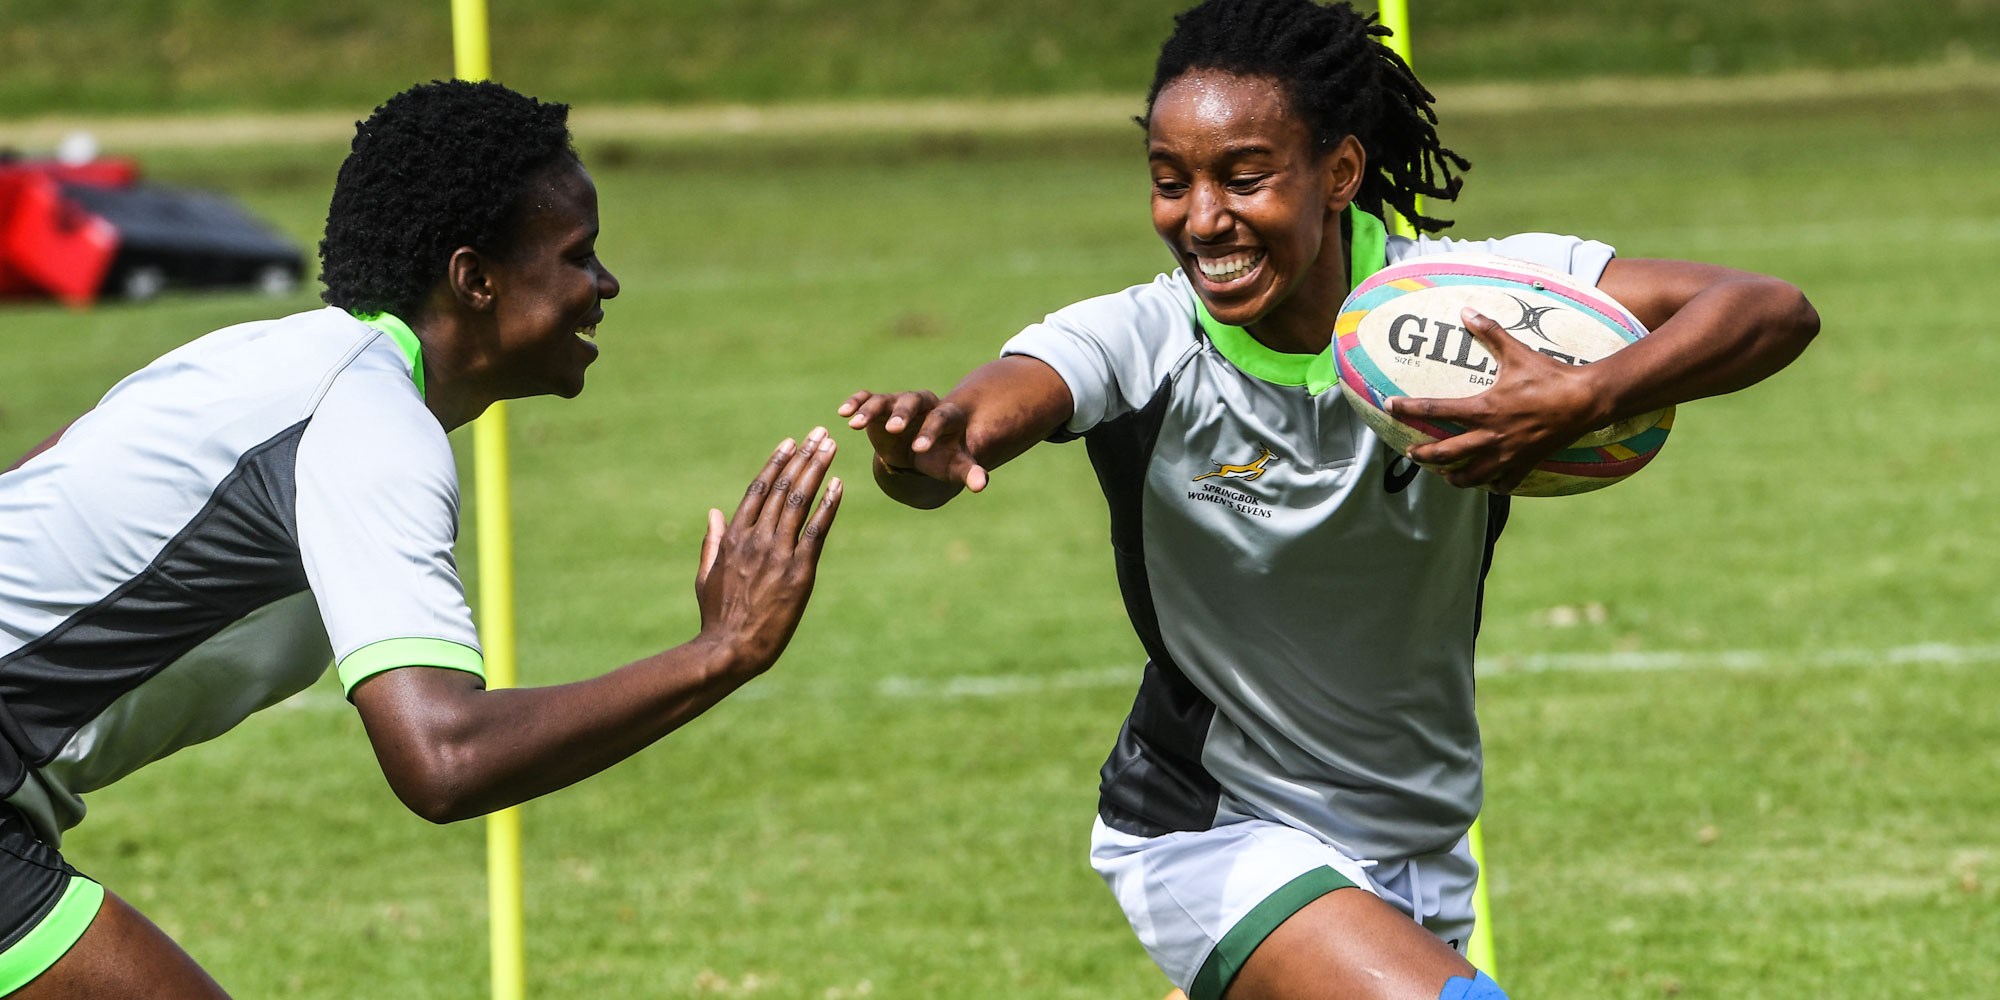 Snenhlanhla Shozi last played for the team at the 2018 Rugby World Cup Sevens in San Francisco, USA.